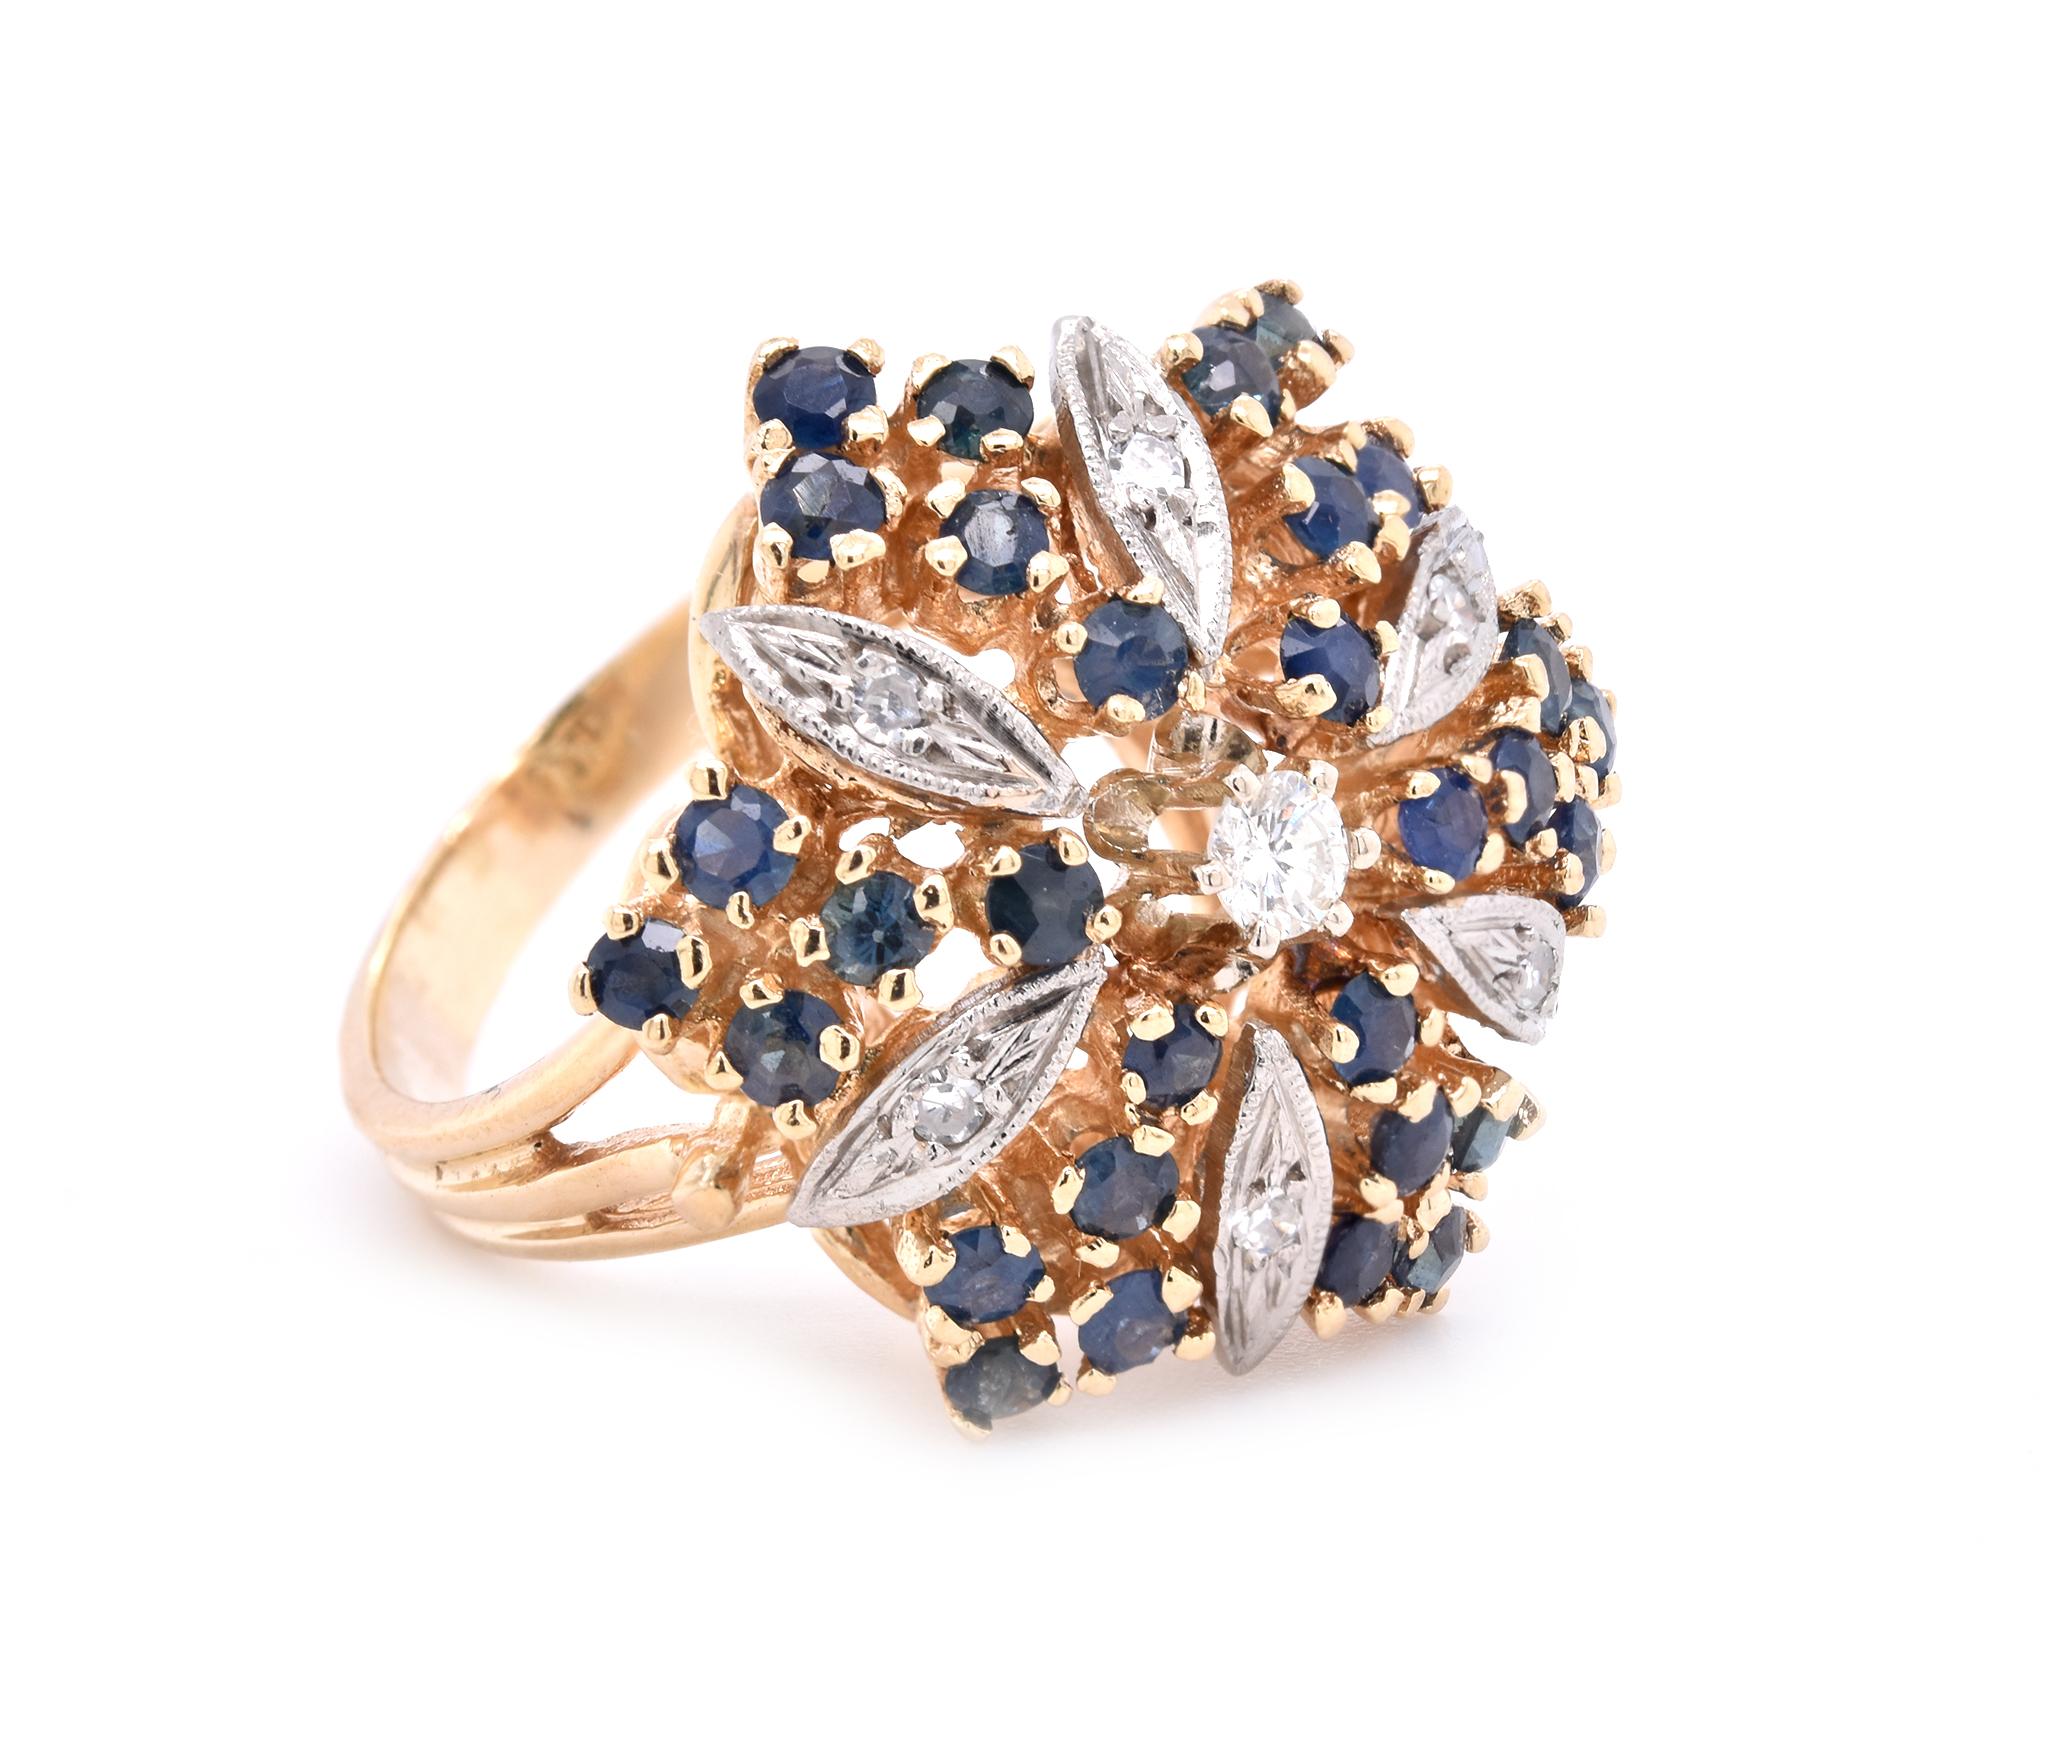 Designer: custom
Material: 14K yellow gold
Diamond: 7 round brilliant cut = .16cttw
Color: G
Clarity: VS2
Sapphire: 30 round cut = 1.20cttw
Ring Size: 7 (please allow up to 2 additional business days for sizing requests)
Dimensions: ring top